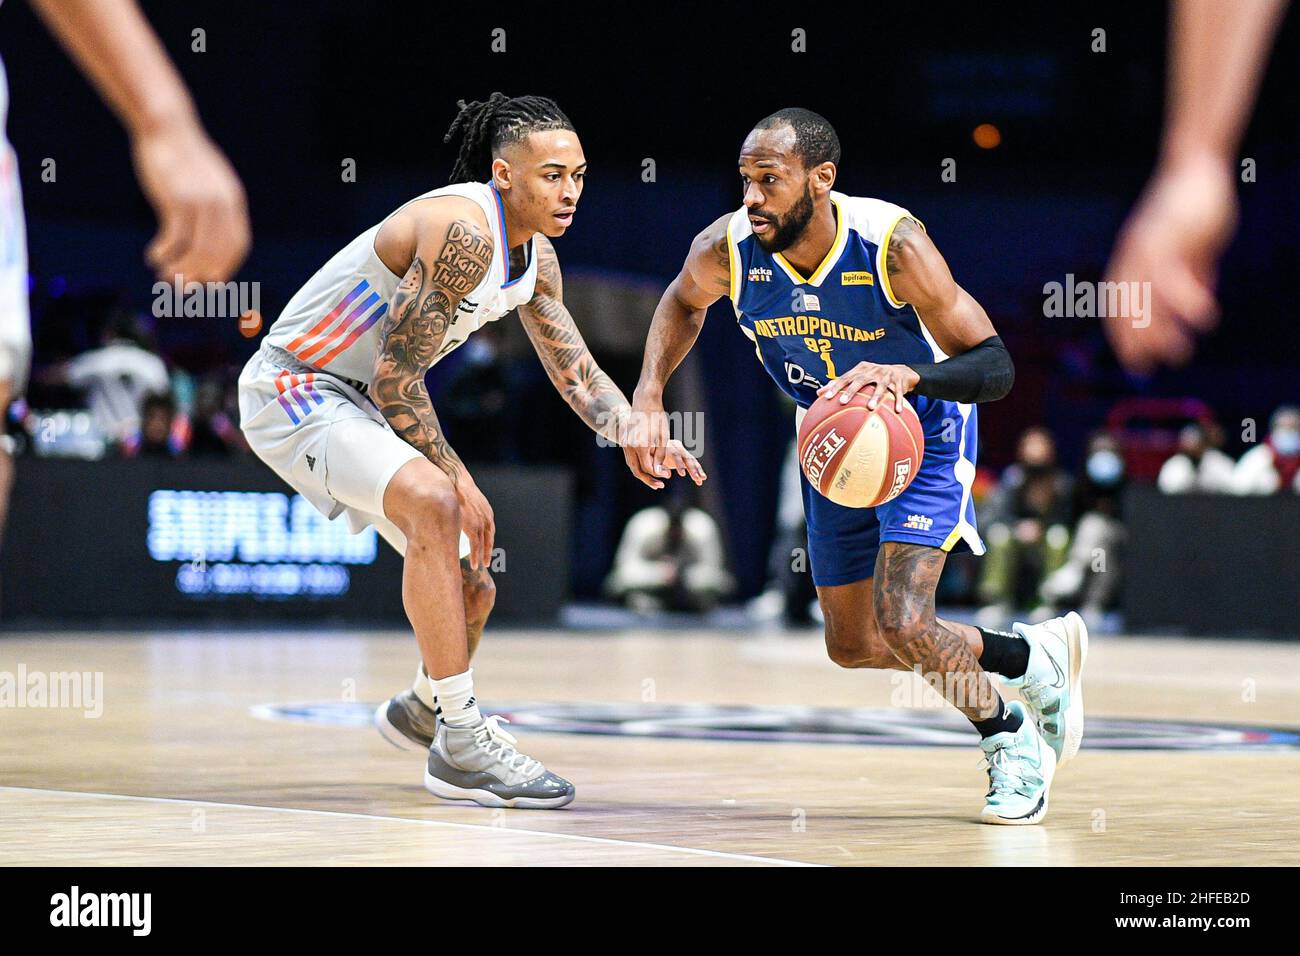 Will Cummings (right) of Metropolitans 92 and Kyle Allman Jr. of Paris  Basketball during the French championship, Betclic Elite Basketball match  between Paris Basketball and Metropolitans 92 (Boulogne-Levallois) on  January 15, 2022